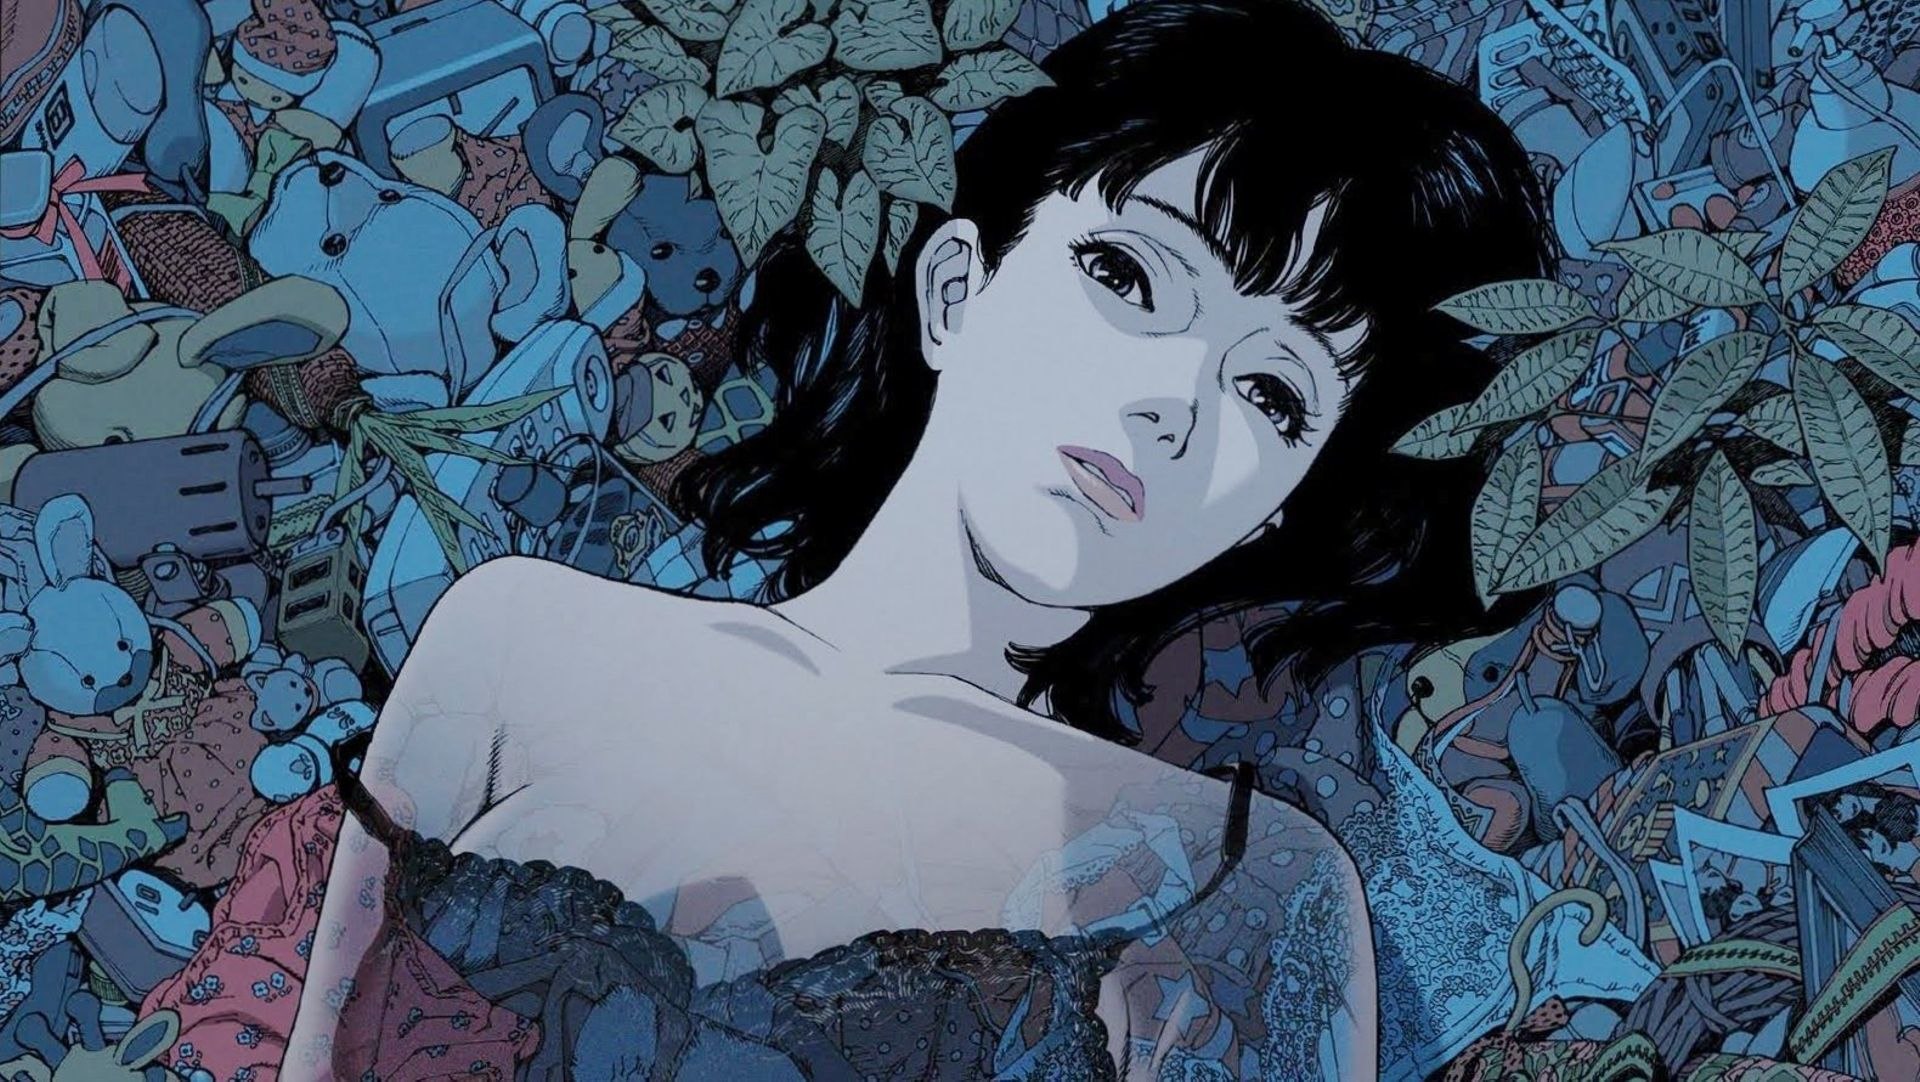 TRAILER GKIDS Acquires Theatrical Rights to Perfect Blue